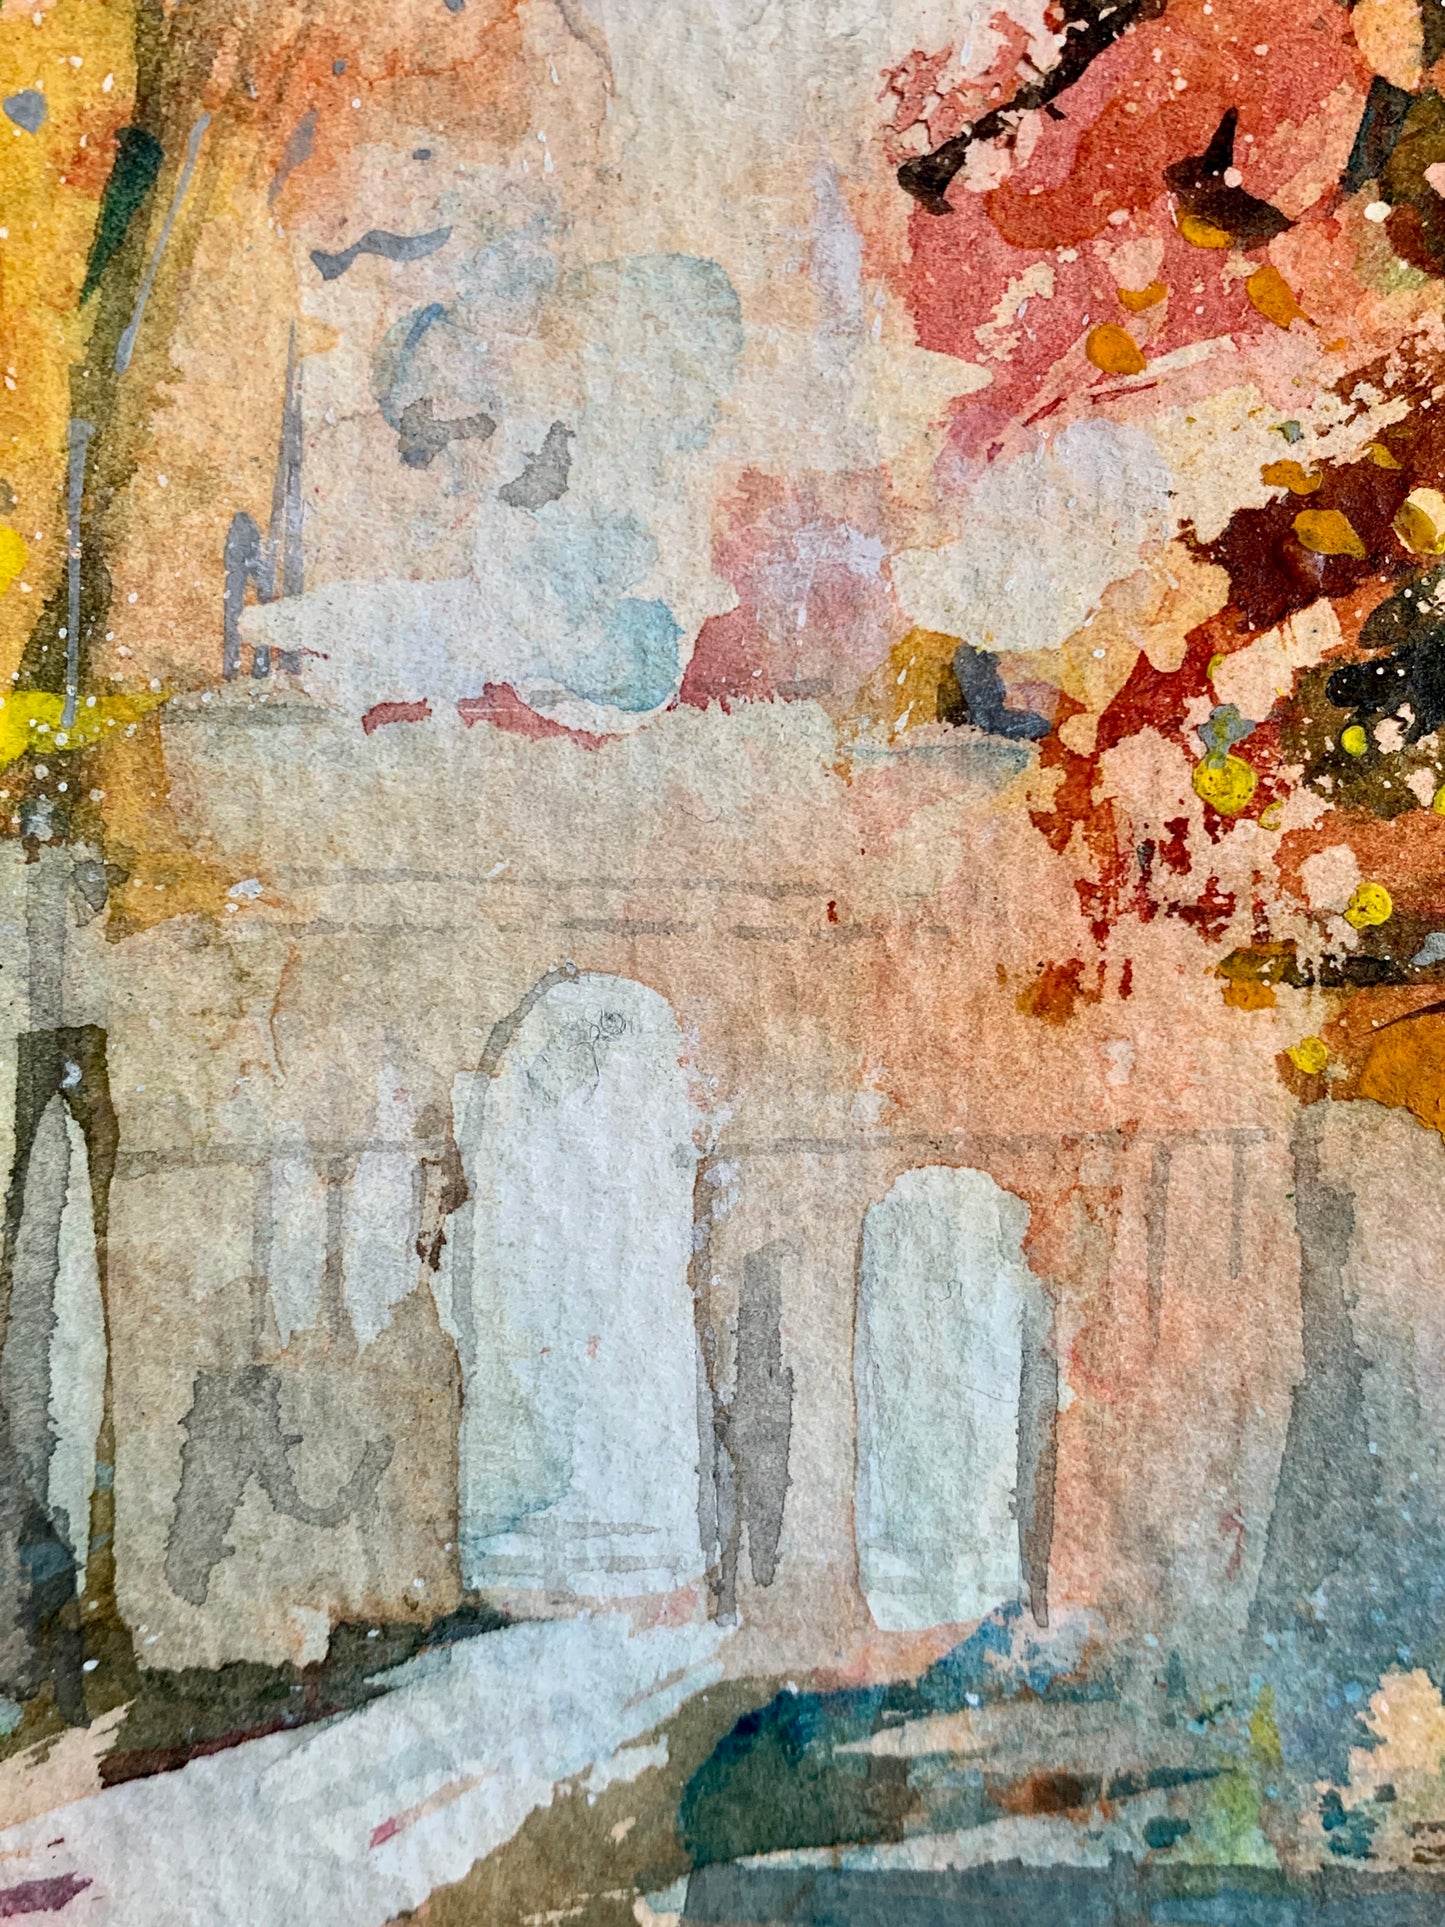 Close up of watercolour technique, influenced by Cezanne